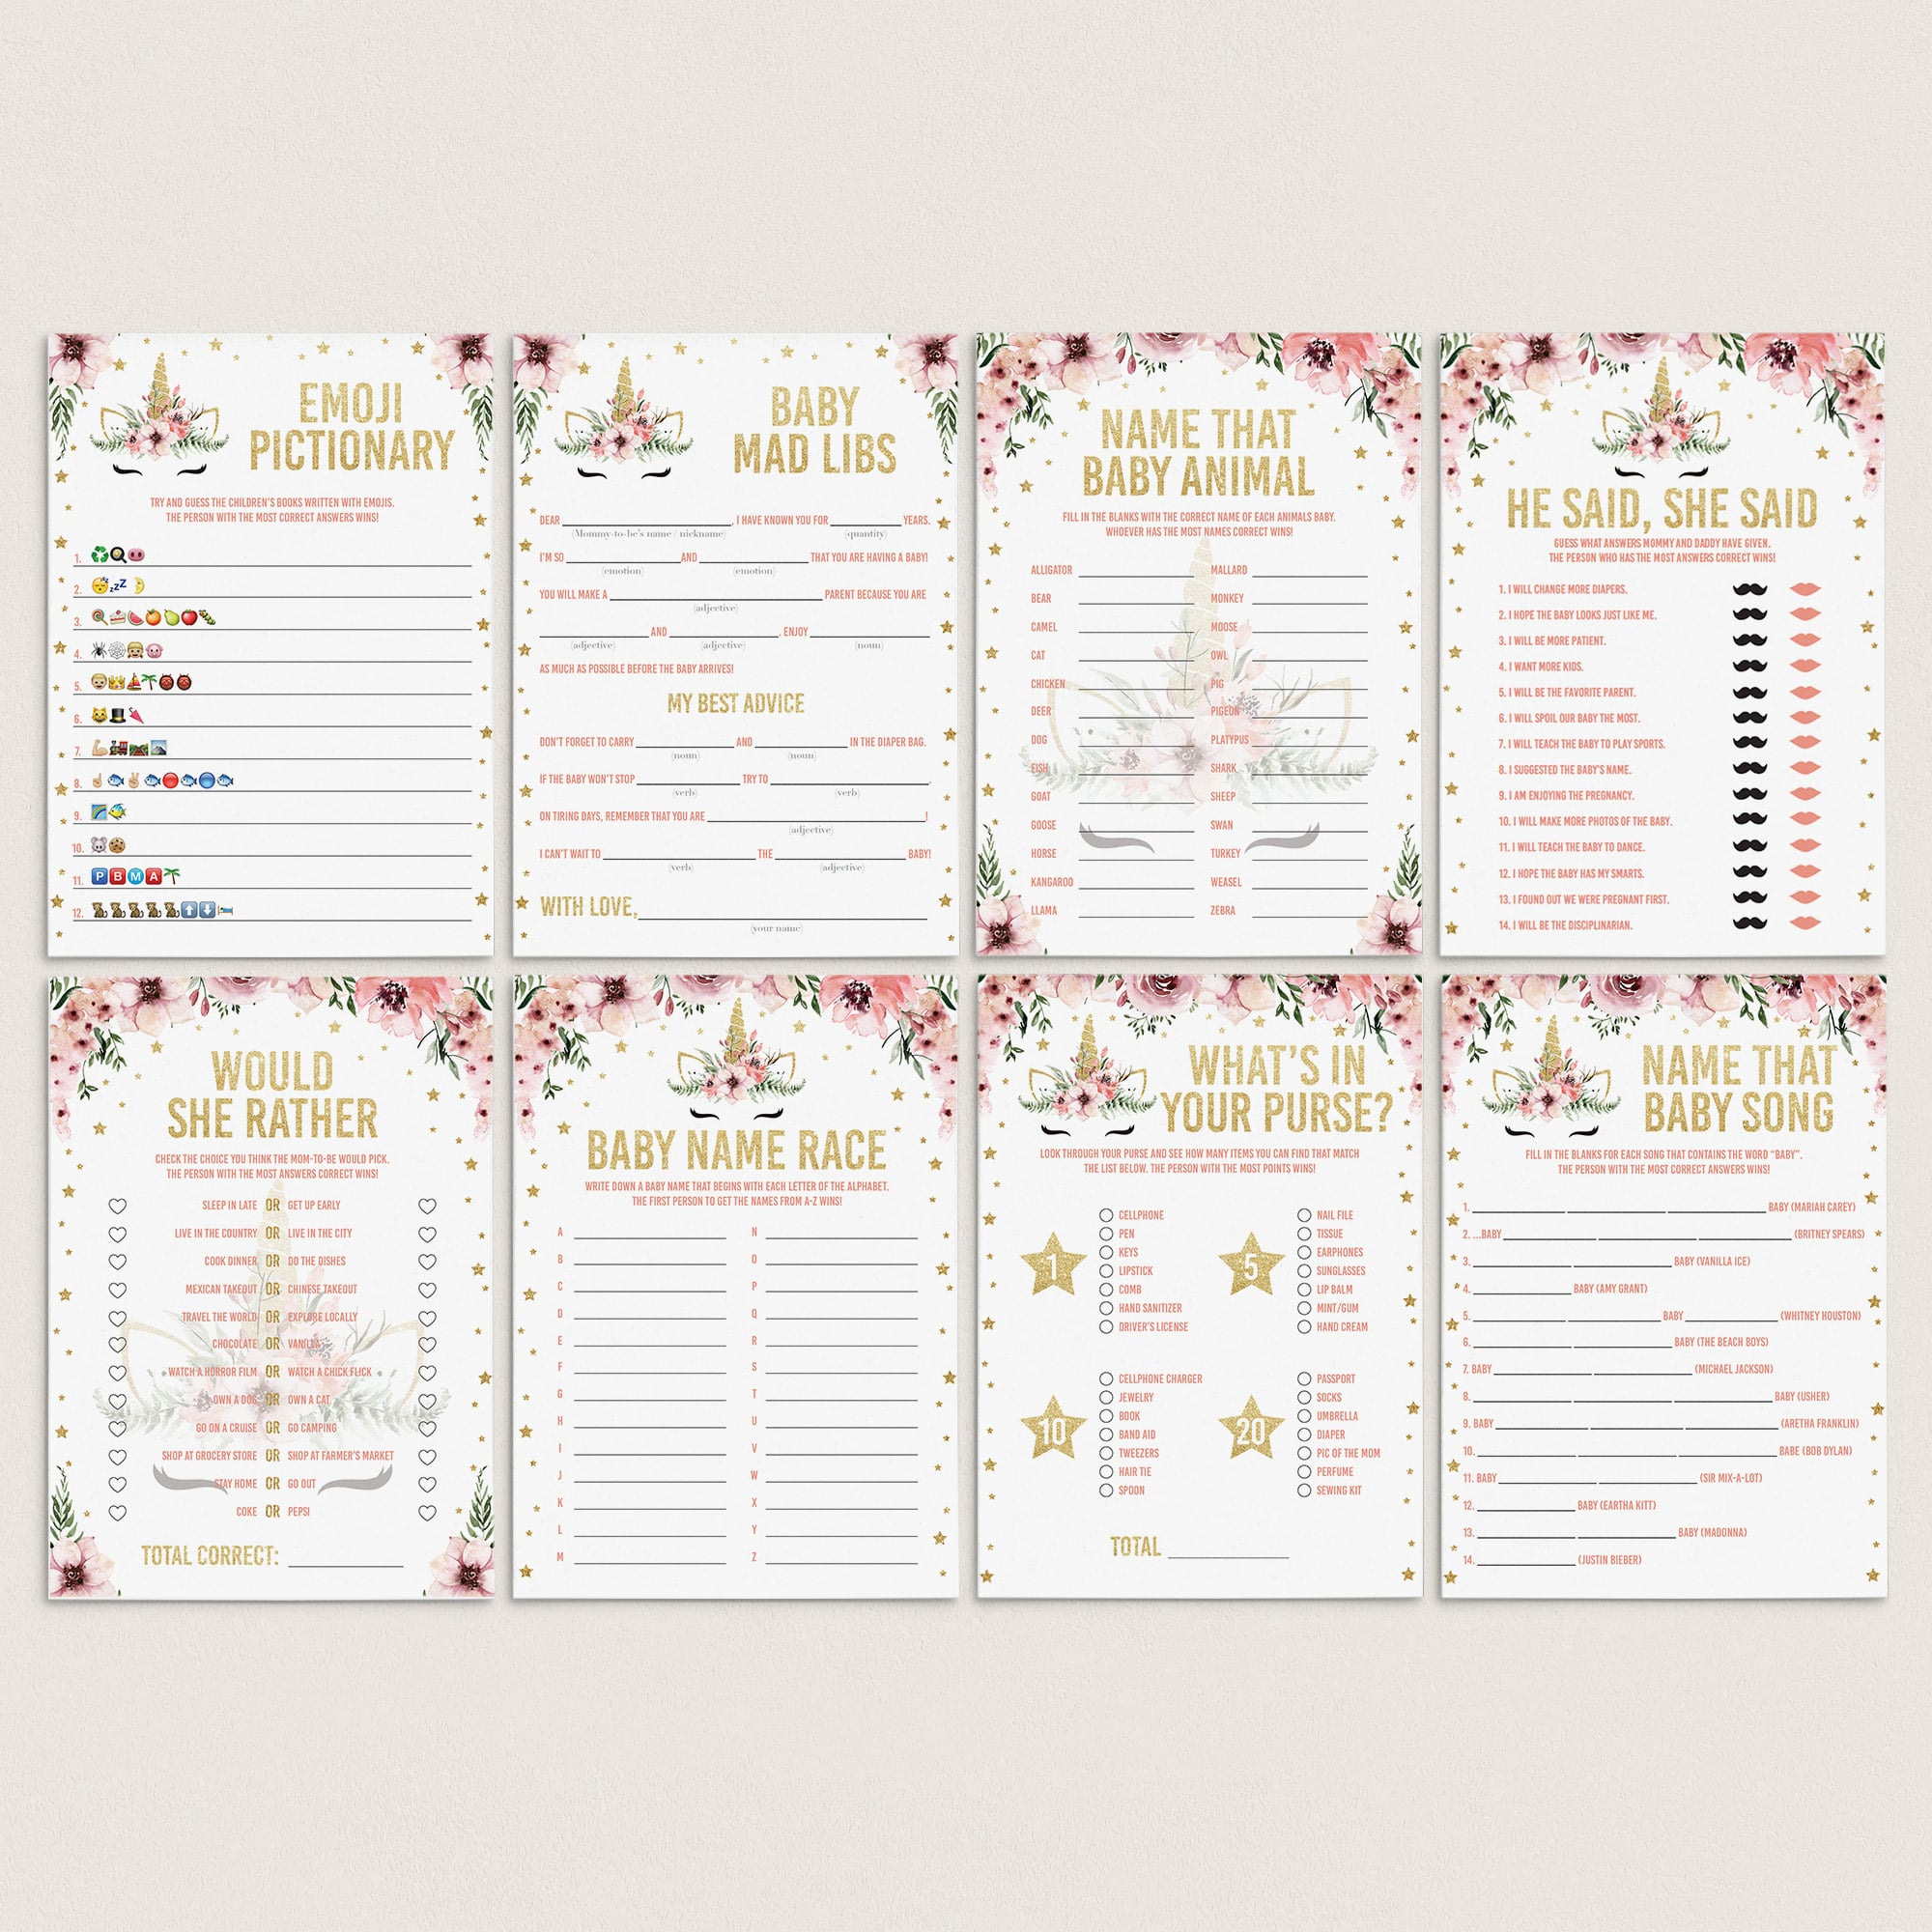 Floral unicorn babyshower games pack XL printable by LittleSizzle